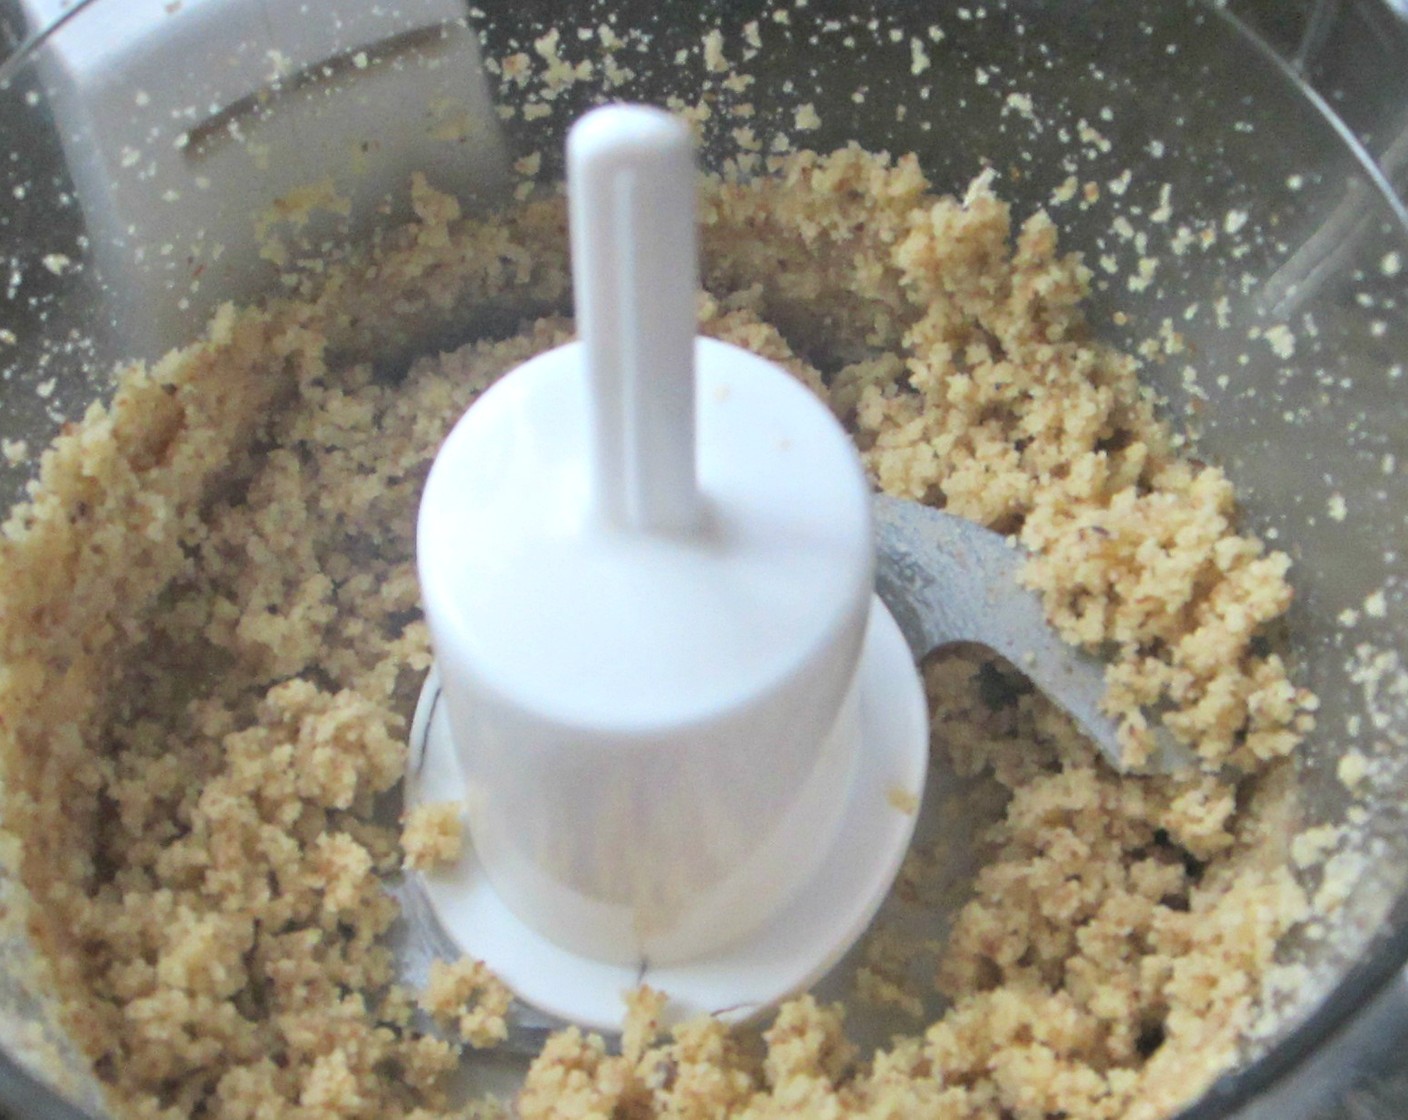 step 13 Scrape nuts from the sides of the food processor, add Maple Syrup (1/3 cup), Ground Cinnamon (1 Tbsp), melted Coconut Oil (1 Tbsp), Vanilla Extract (1 Tbsp), Brown Sugar (1 Tbsp) and Salt (to taste) and blend well.